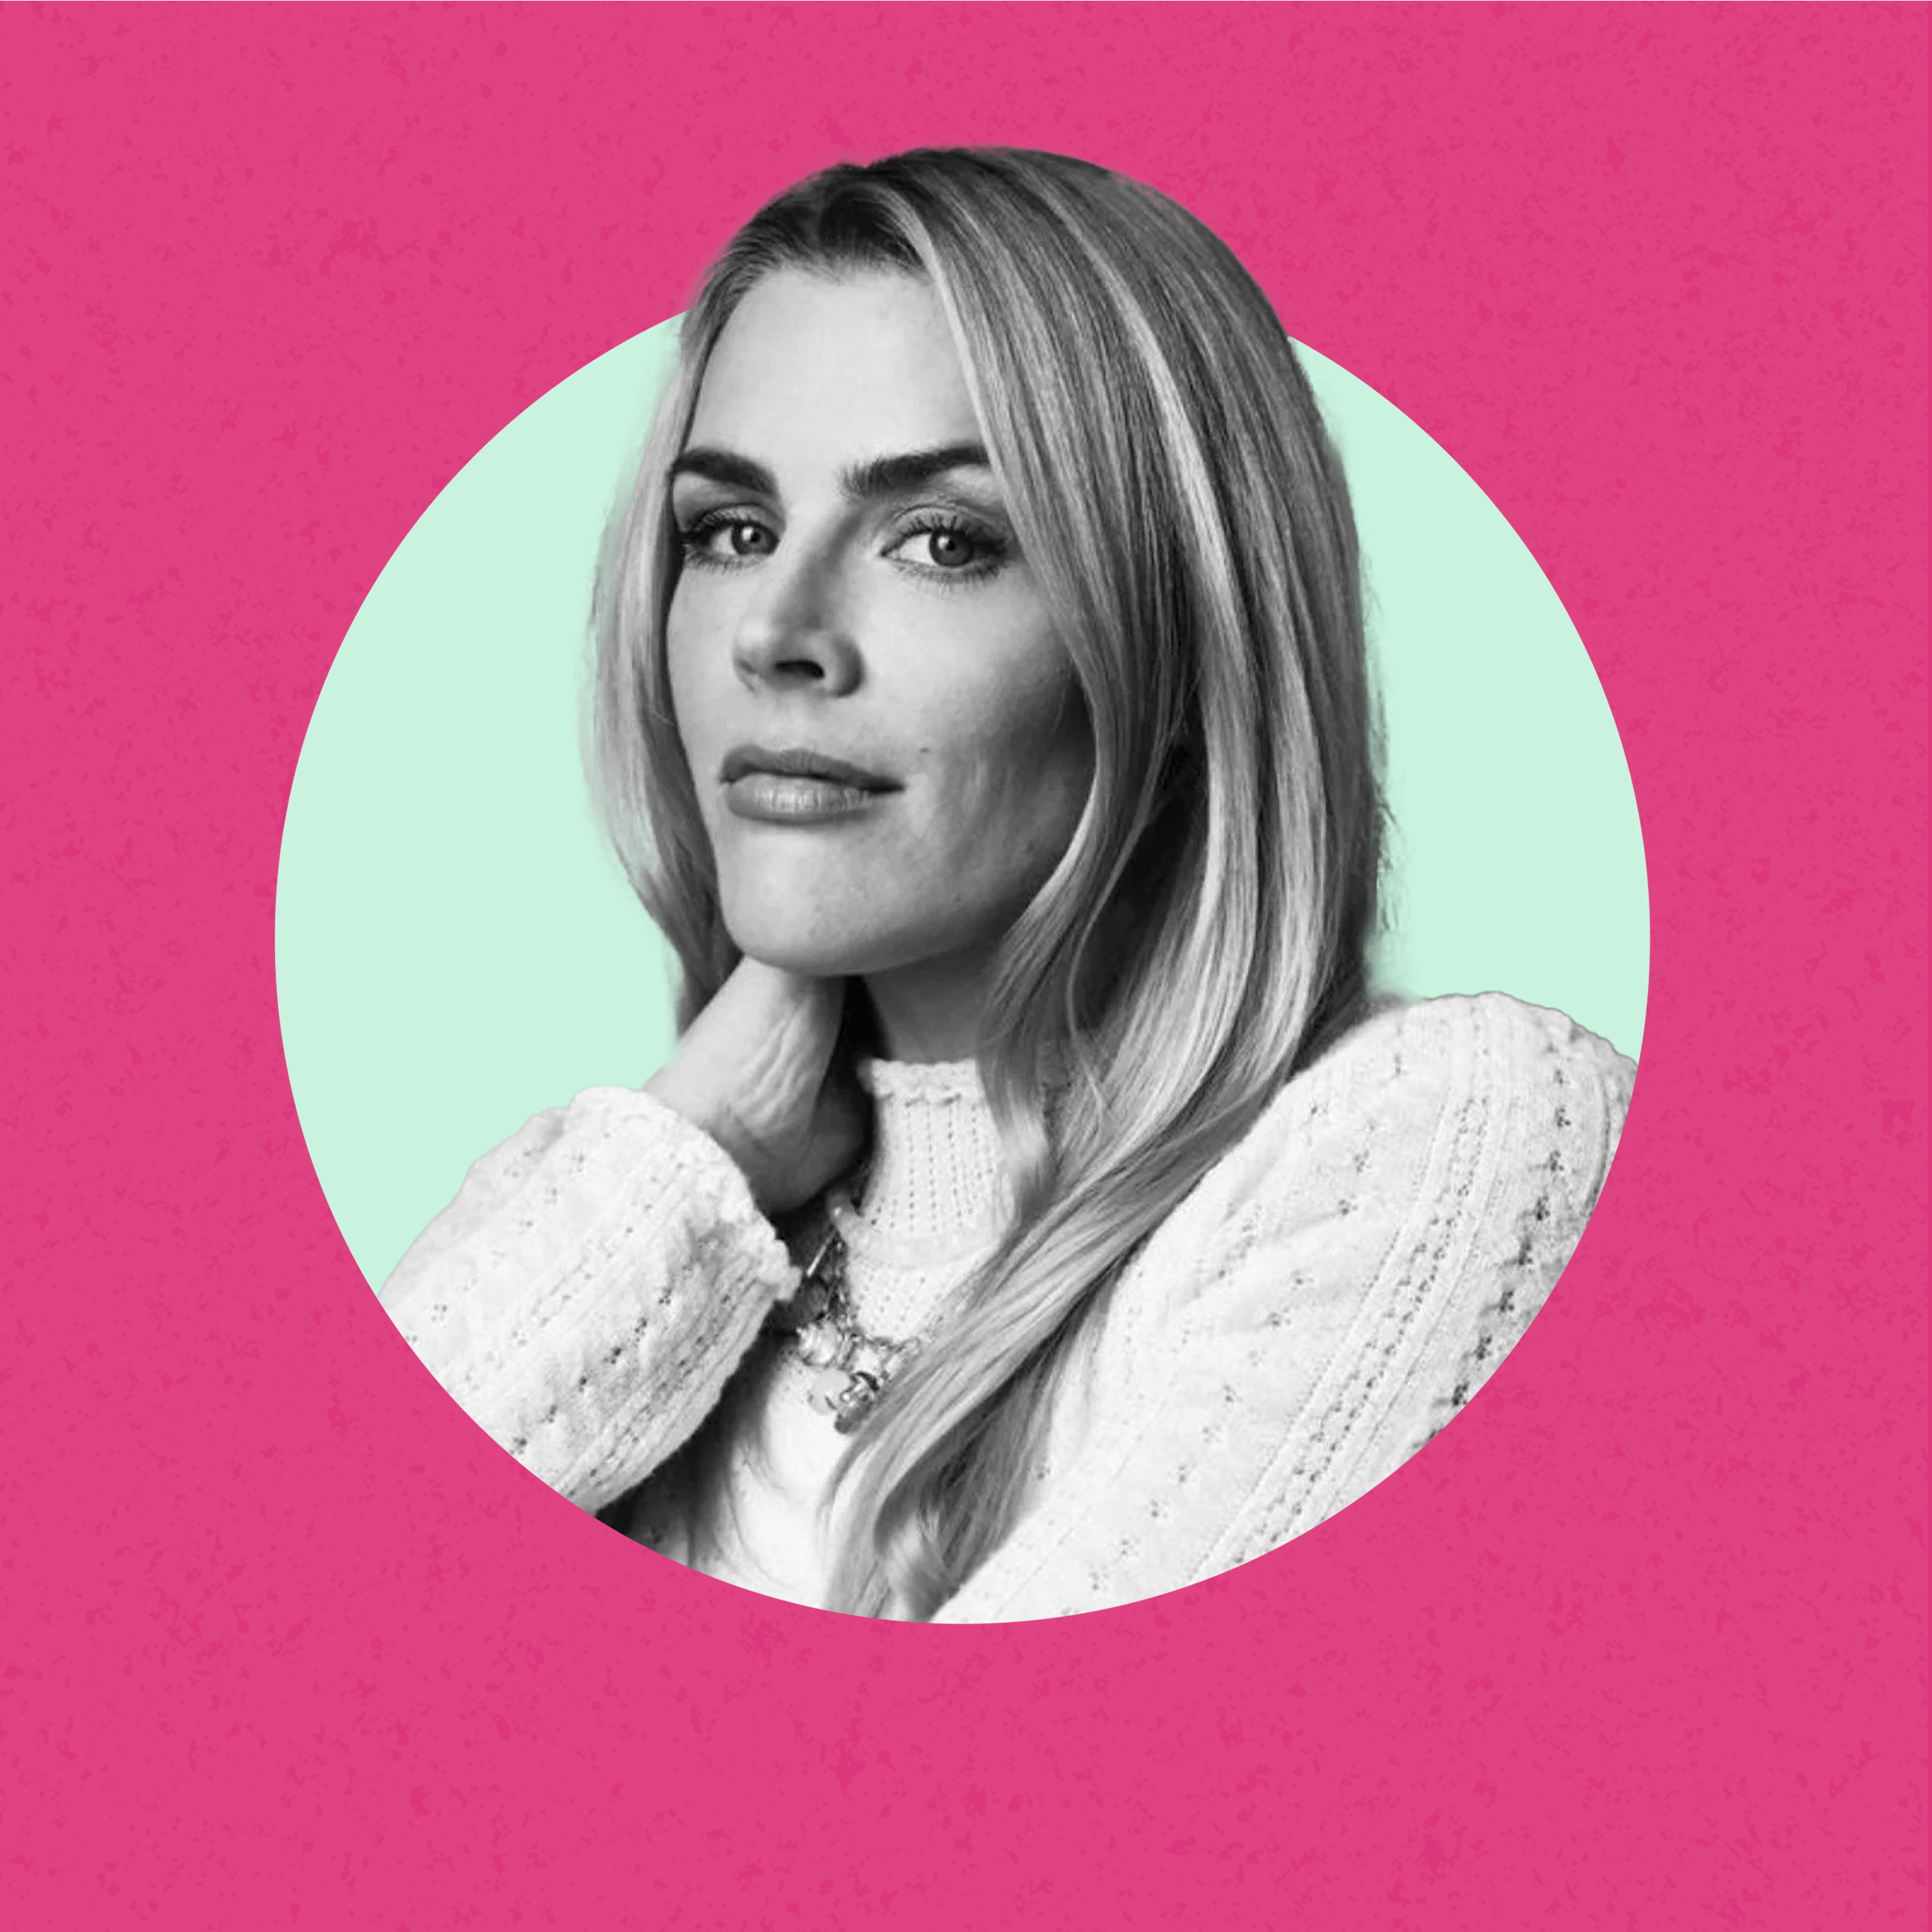 Wedding Registry or Divorce Sale? (with Busy Philipps)